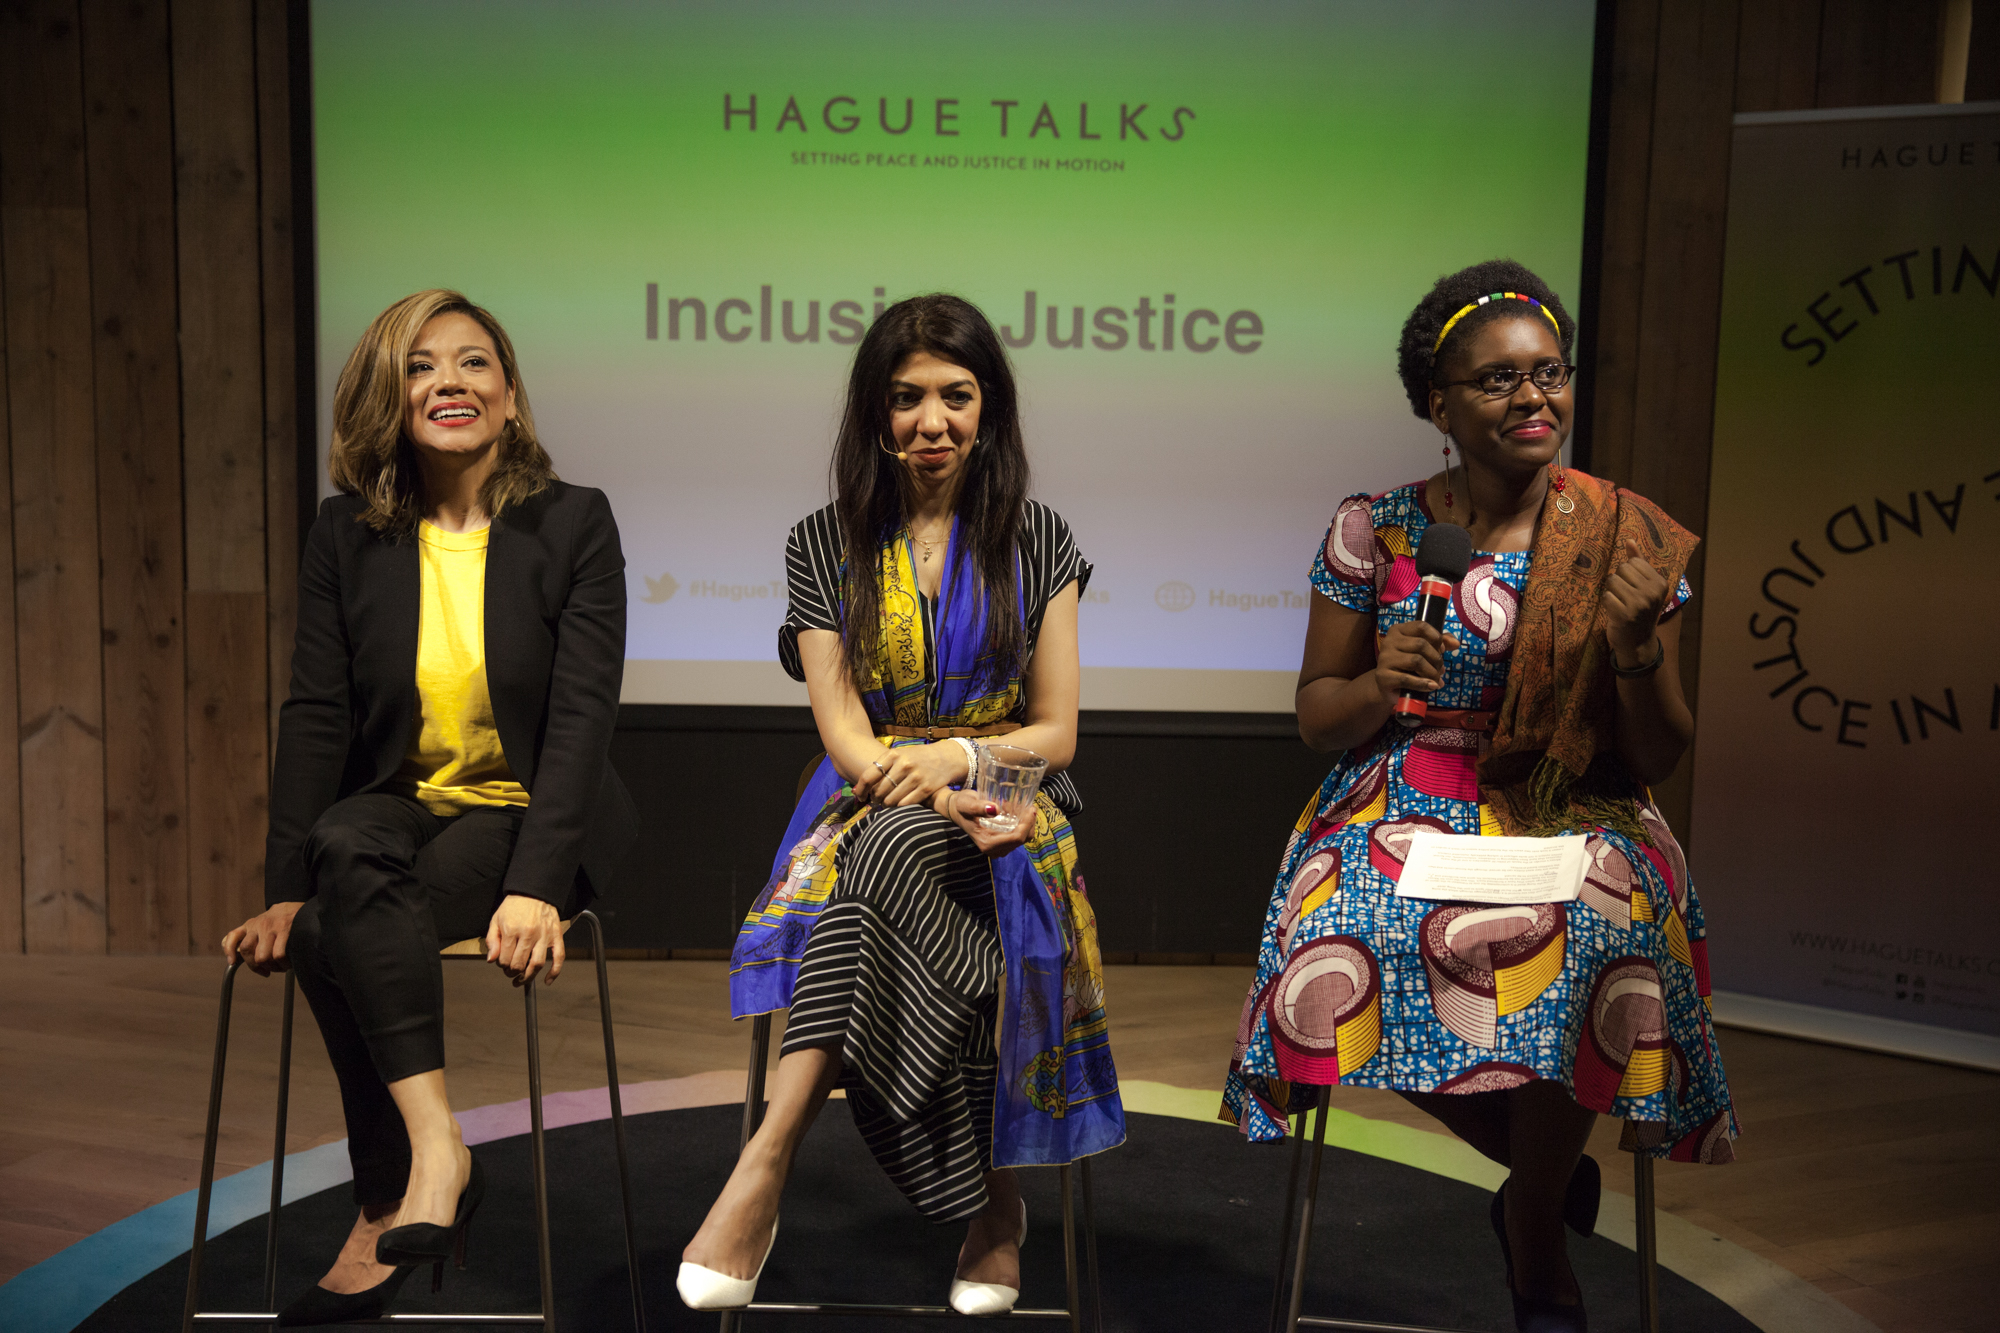 Hague Talks-inclusive justice - Humanity House